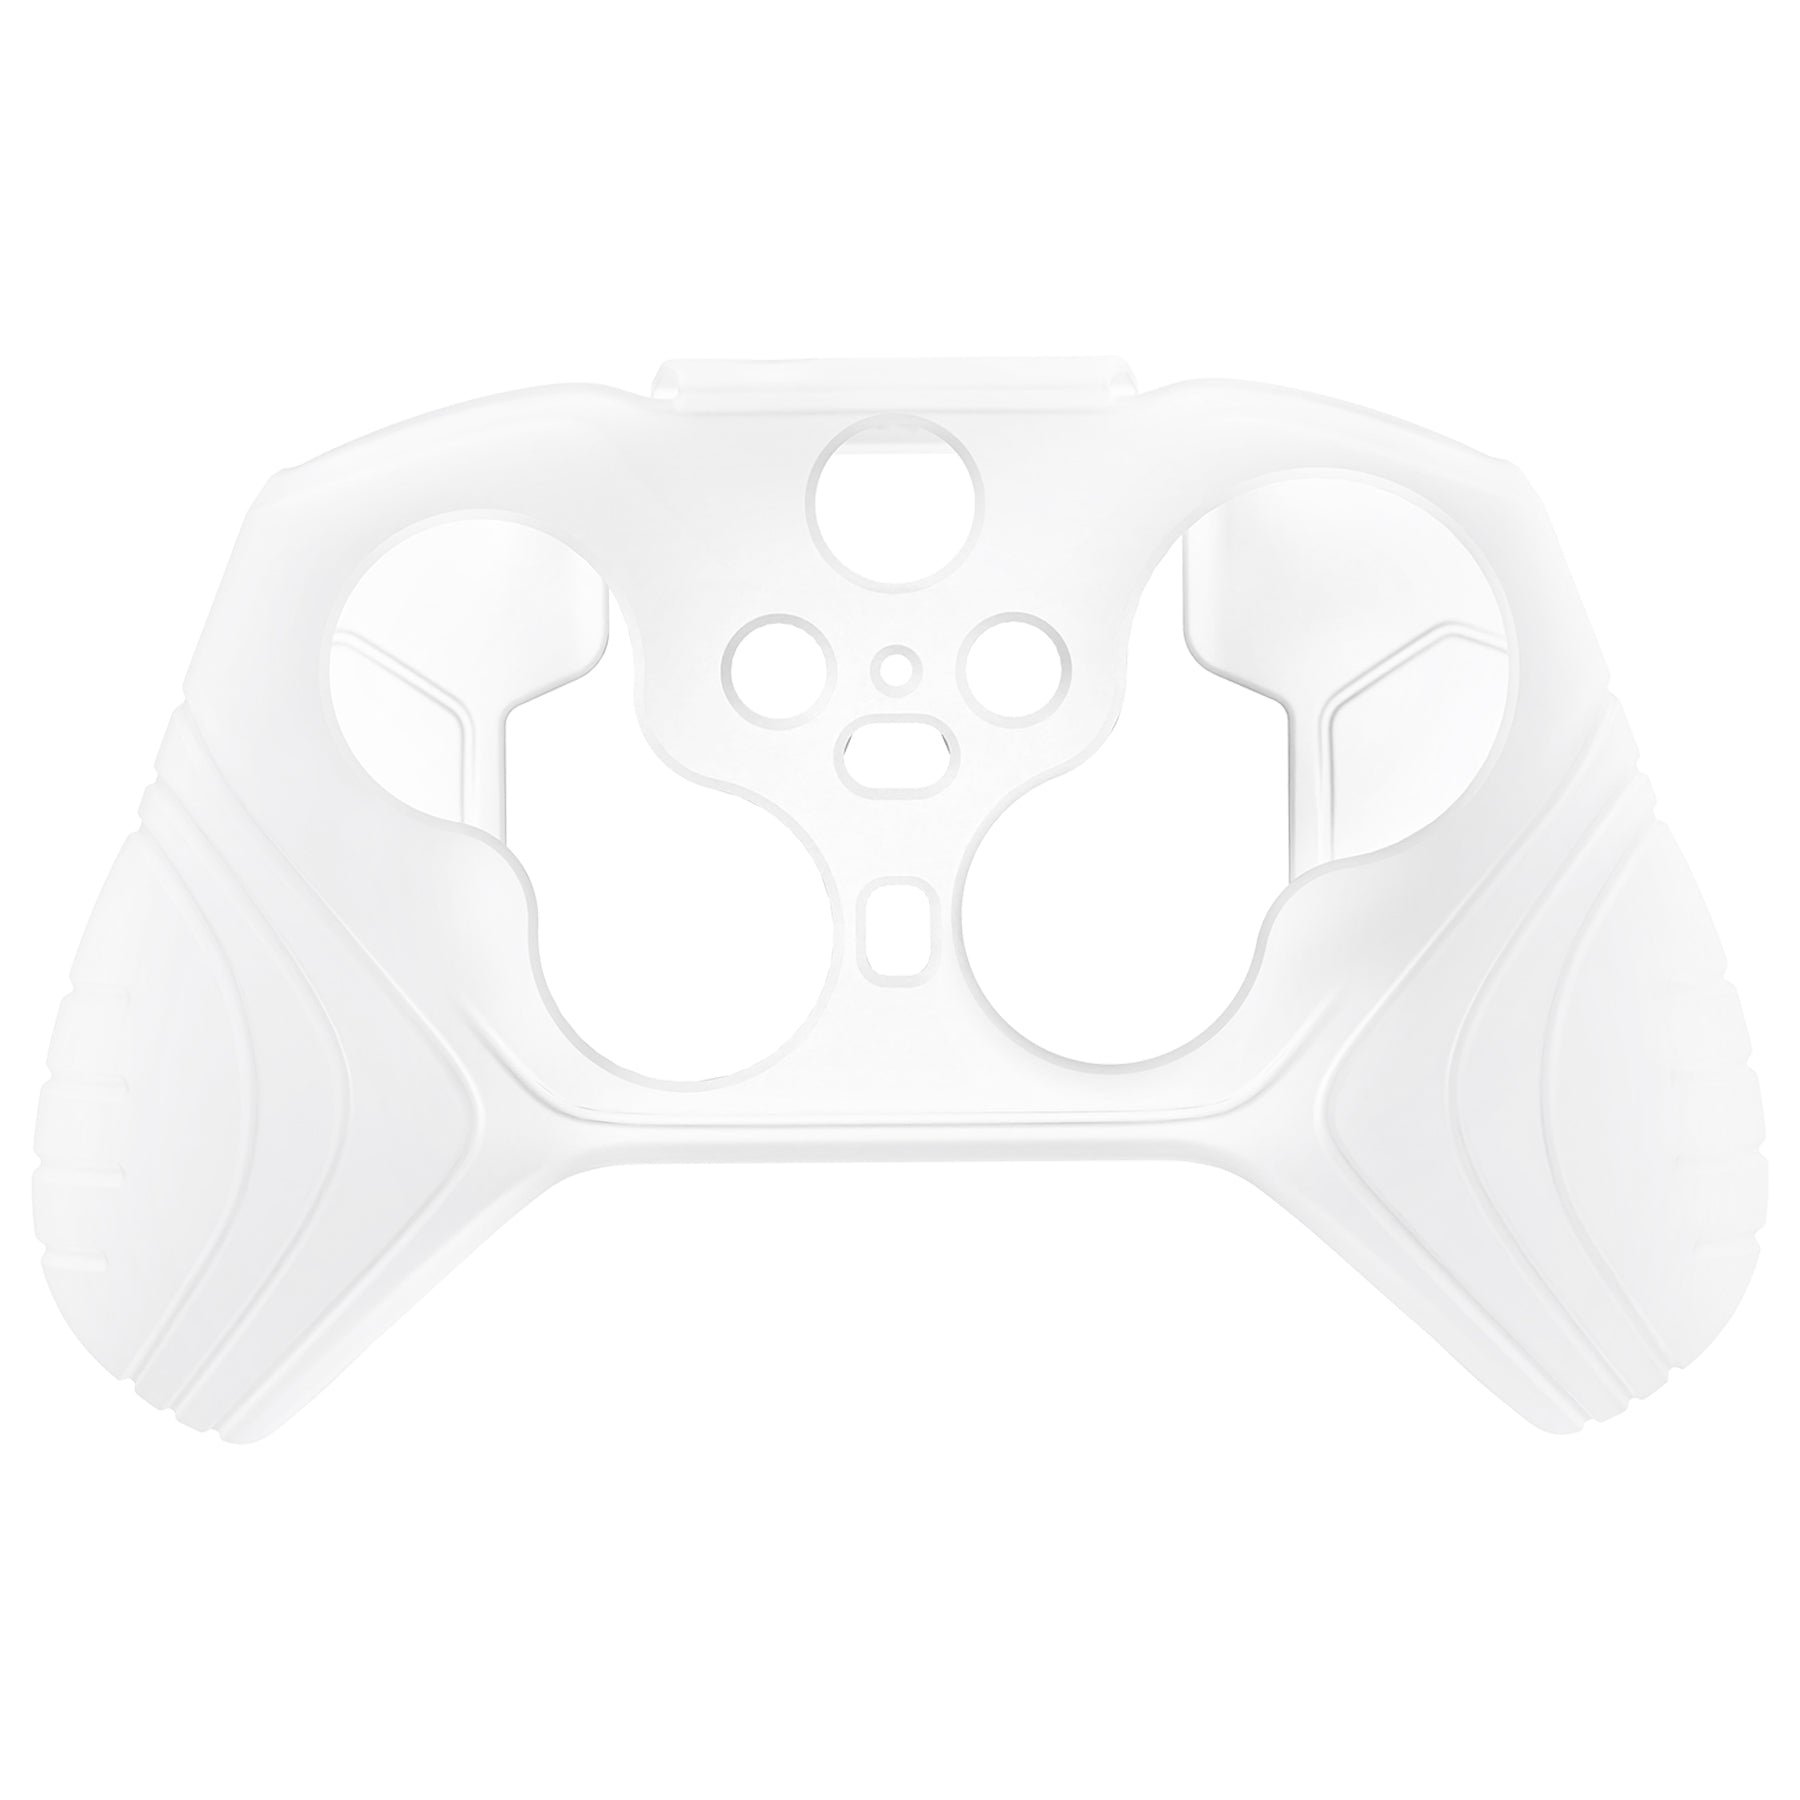 PlayVital Samurai Edition Anti Slip Silicone Case Cover for Xbox Elite Wireless Controller Series 2, Ergonomic Soft Rubber Skin Protector for Xbox Elite Series 2 with Thumb Grip Caps - Clear White- XBE2M003 playvital